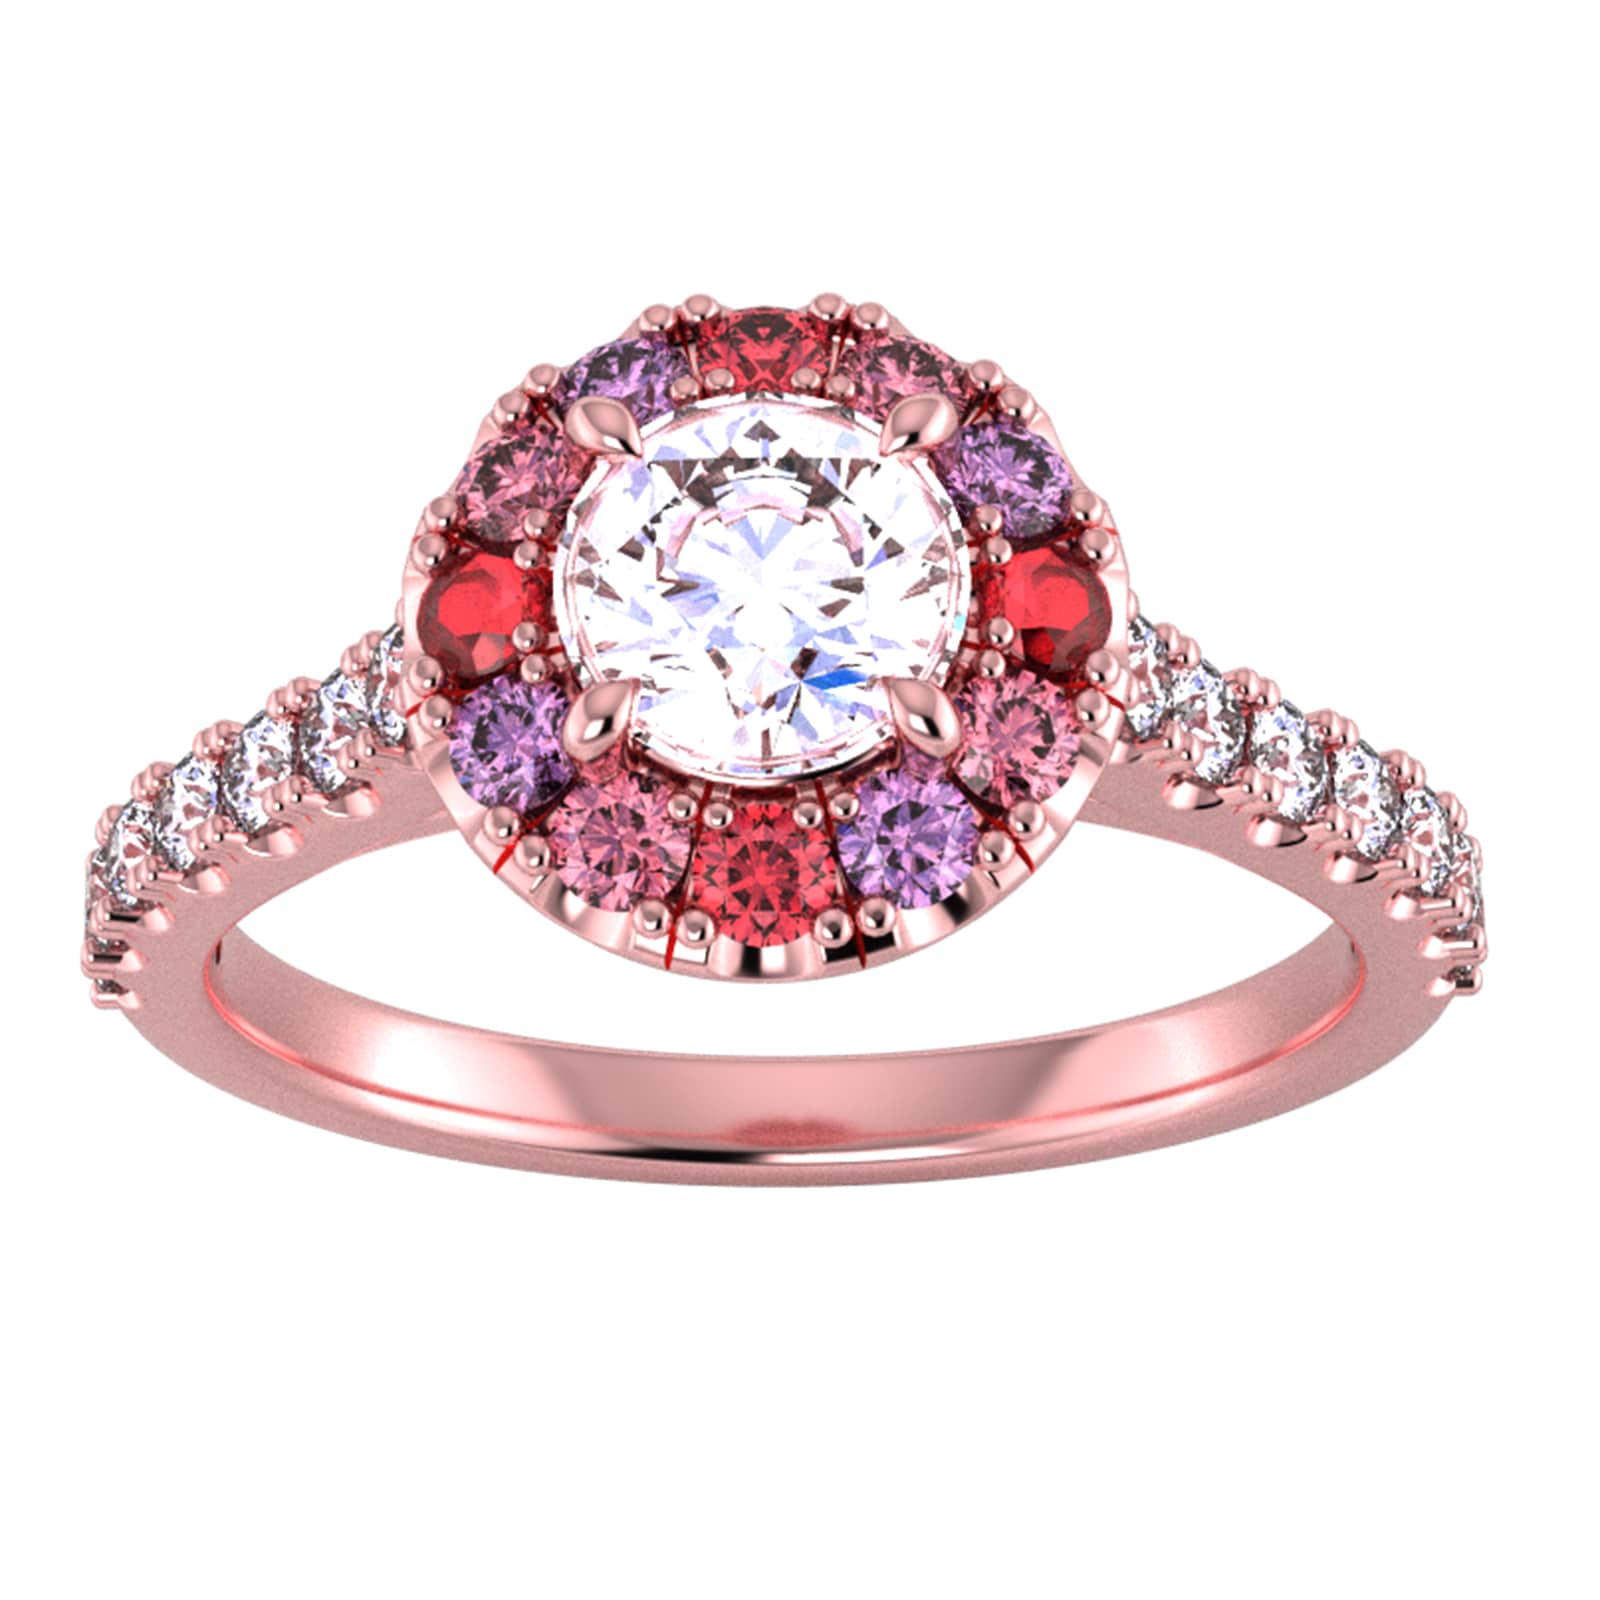 9ct Rose Gold Diamond & Pink, Red, Purple Sapphire Halo Ring - Ring Size W.5